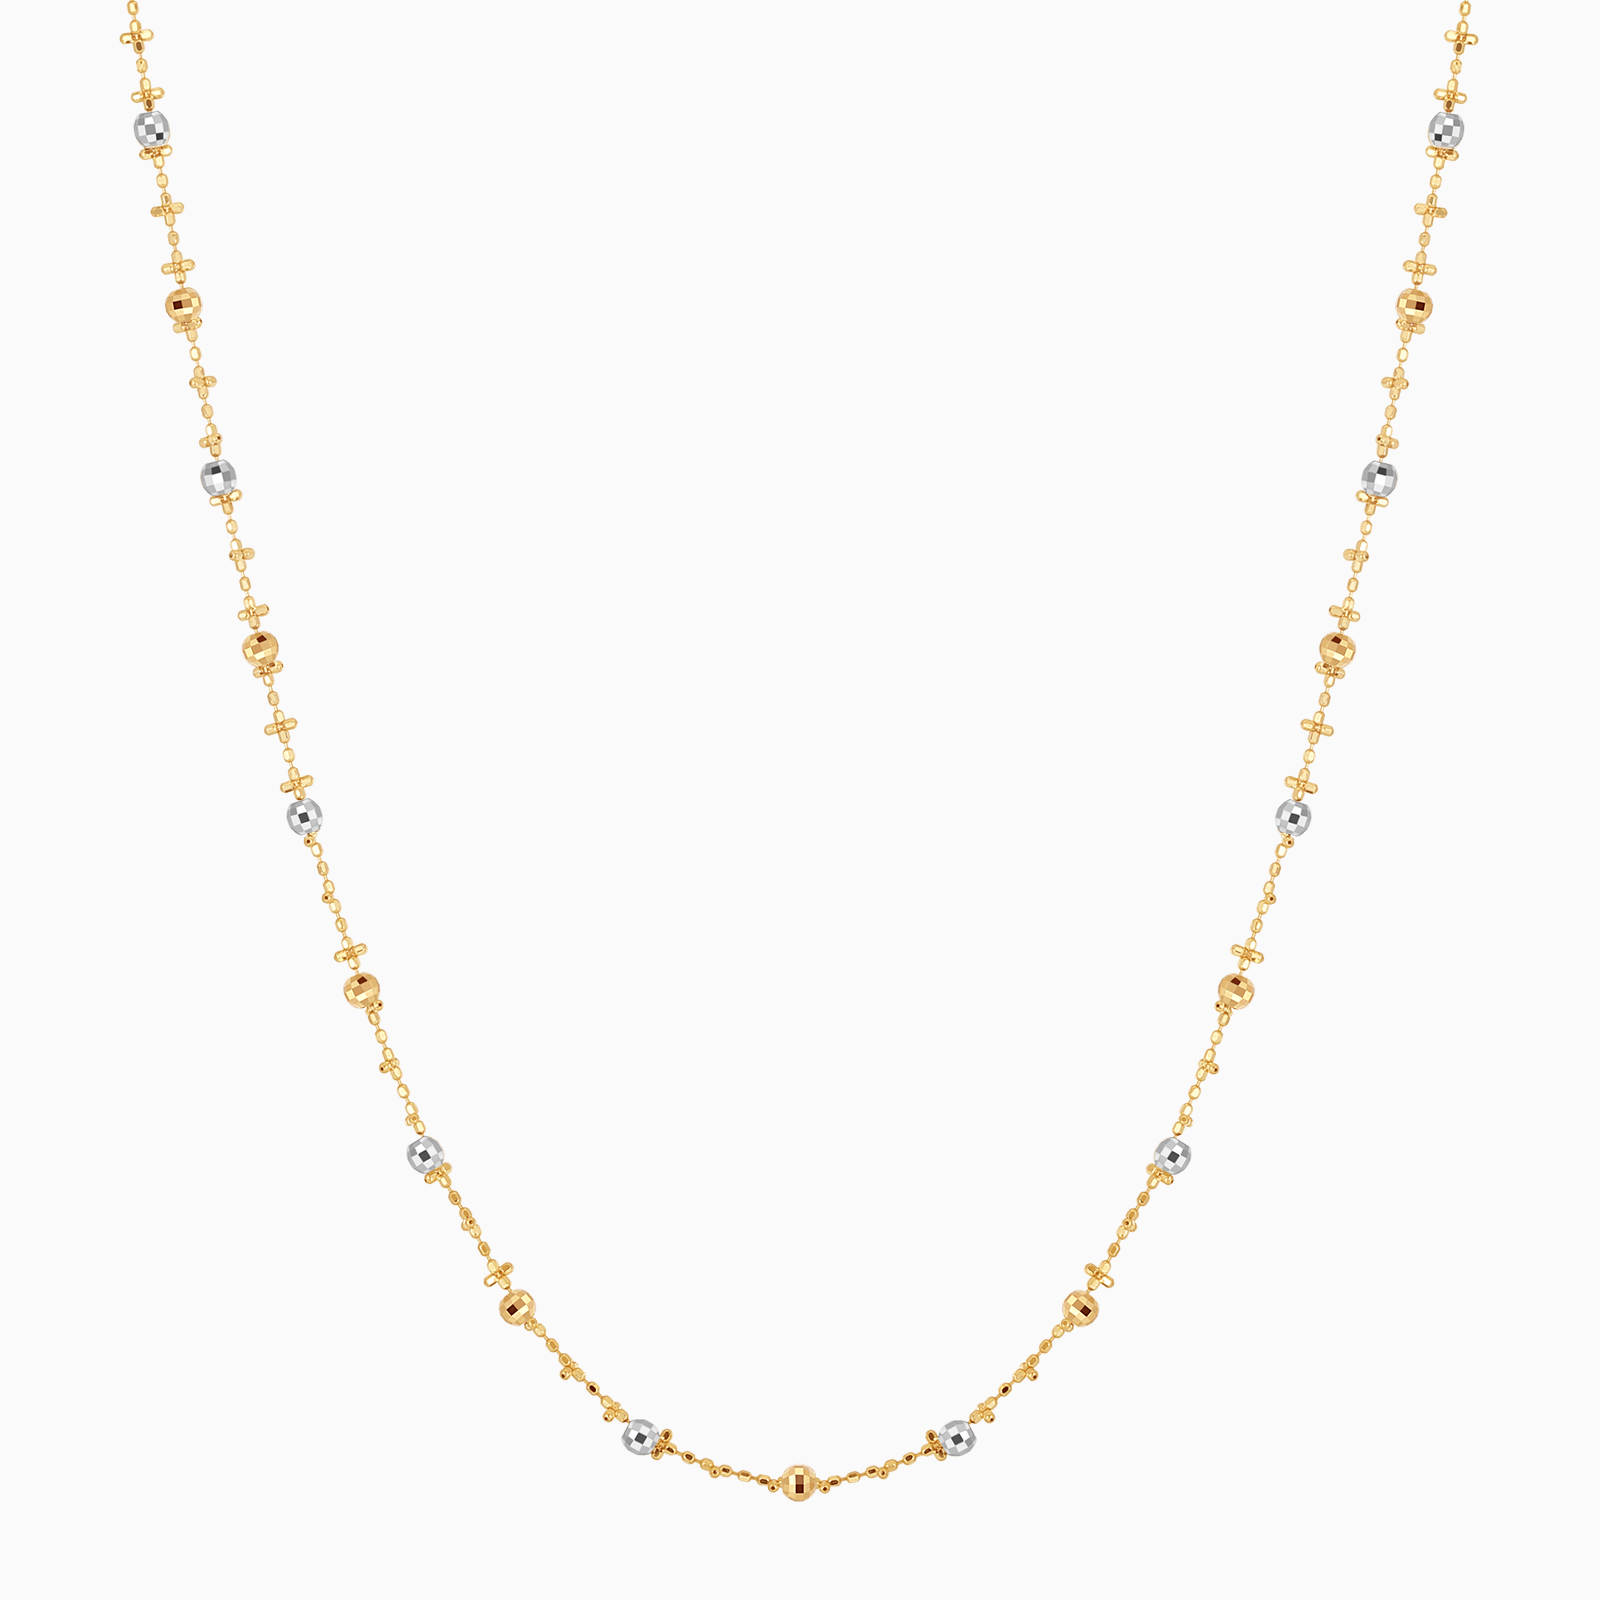 Merino Necklace - Solid Gold